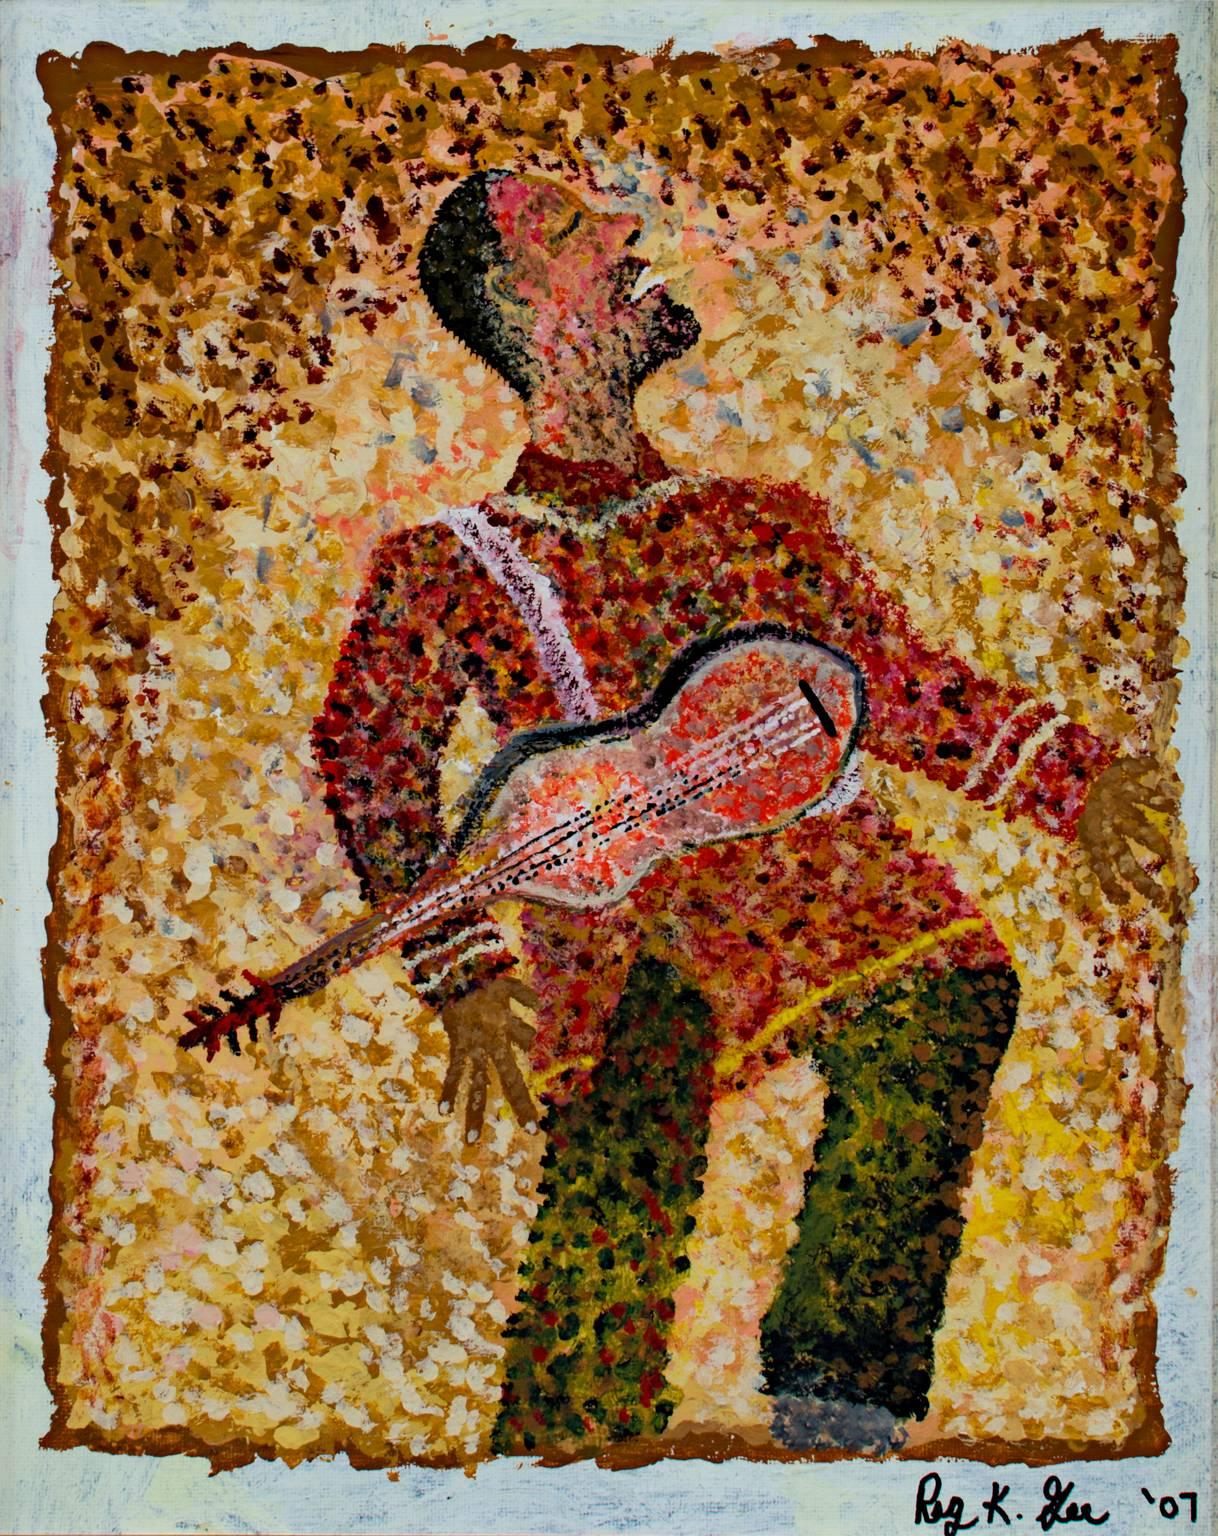 "Lingering Note" is an original acrylic painting on canvas board by Reginald K. Gee. The artist signed the piece in the lower right. This painting depicts a man with a string instrument singing. Gee uses pointillism in this painting. 

14" x 11"